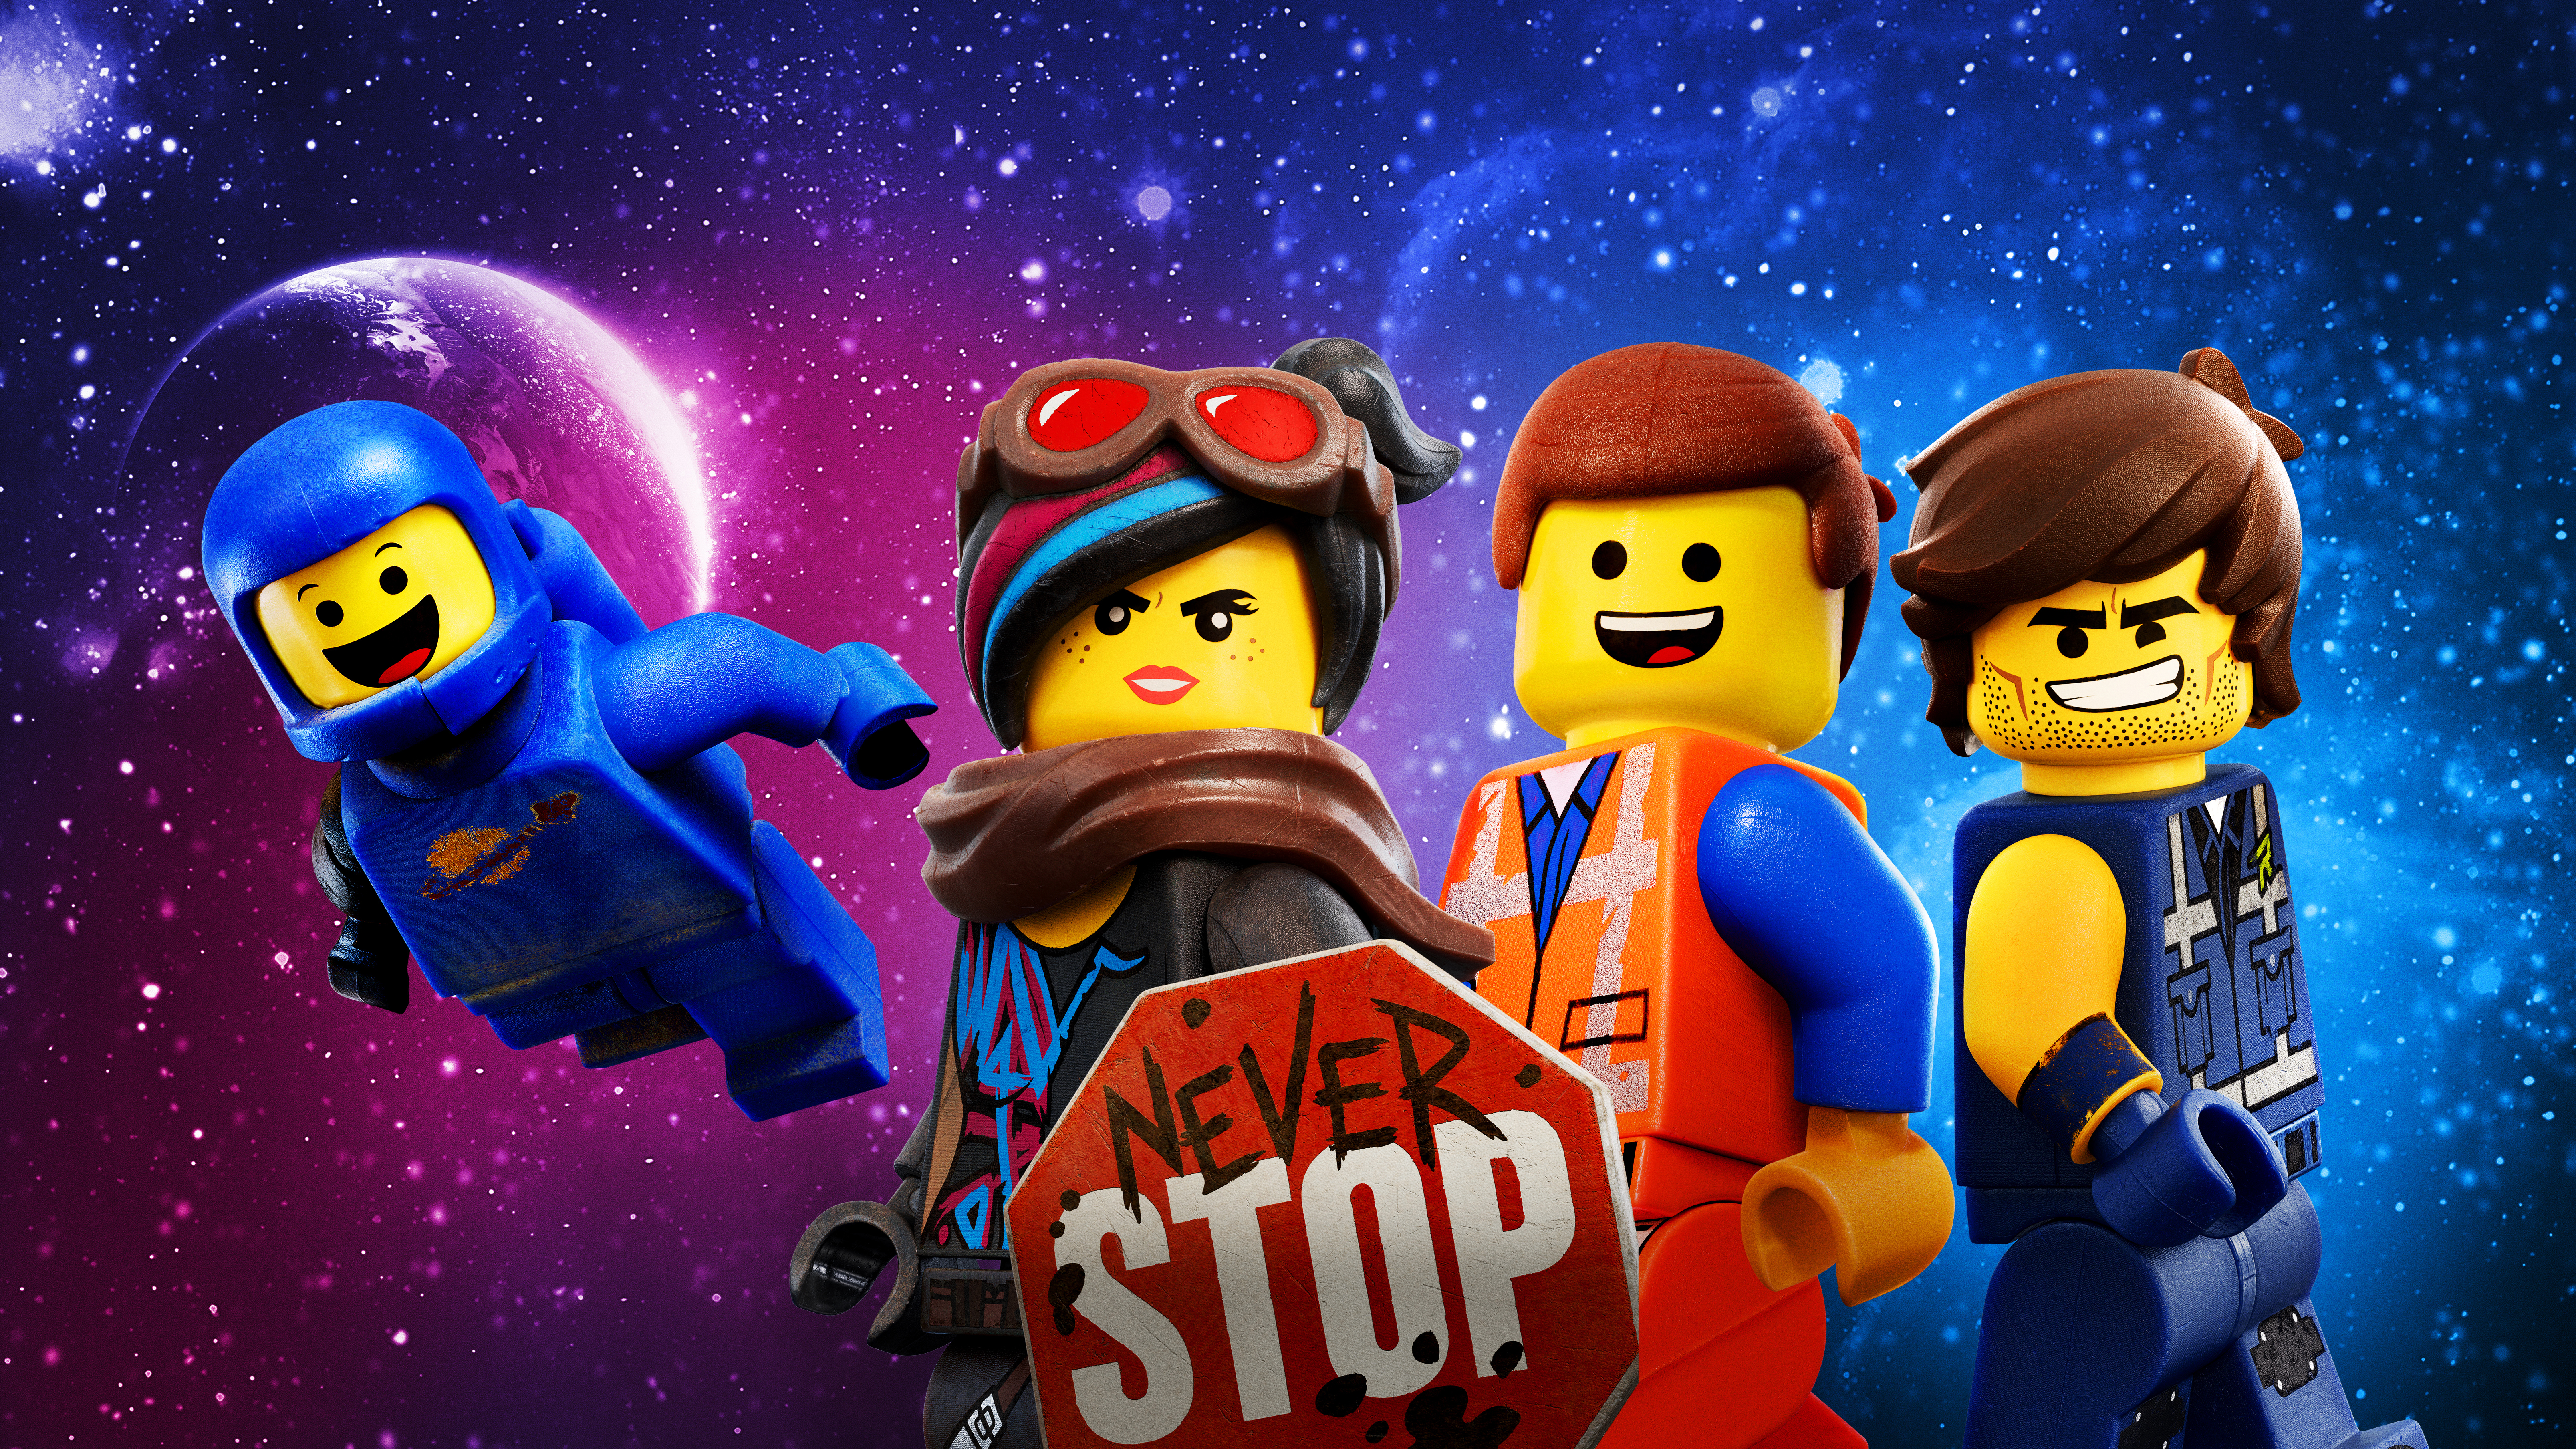 Wallpapers movies the lego movie 2 lego on the desktop